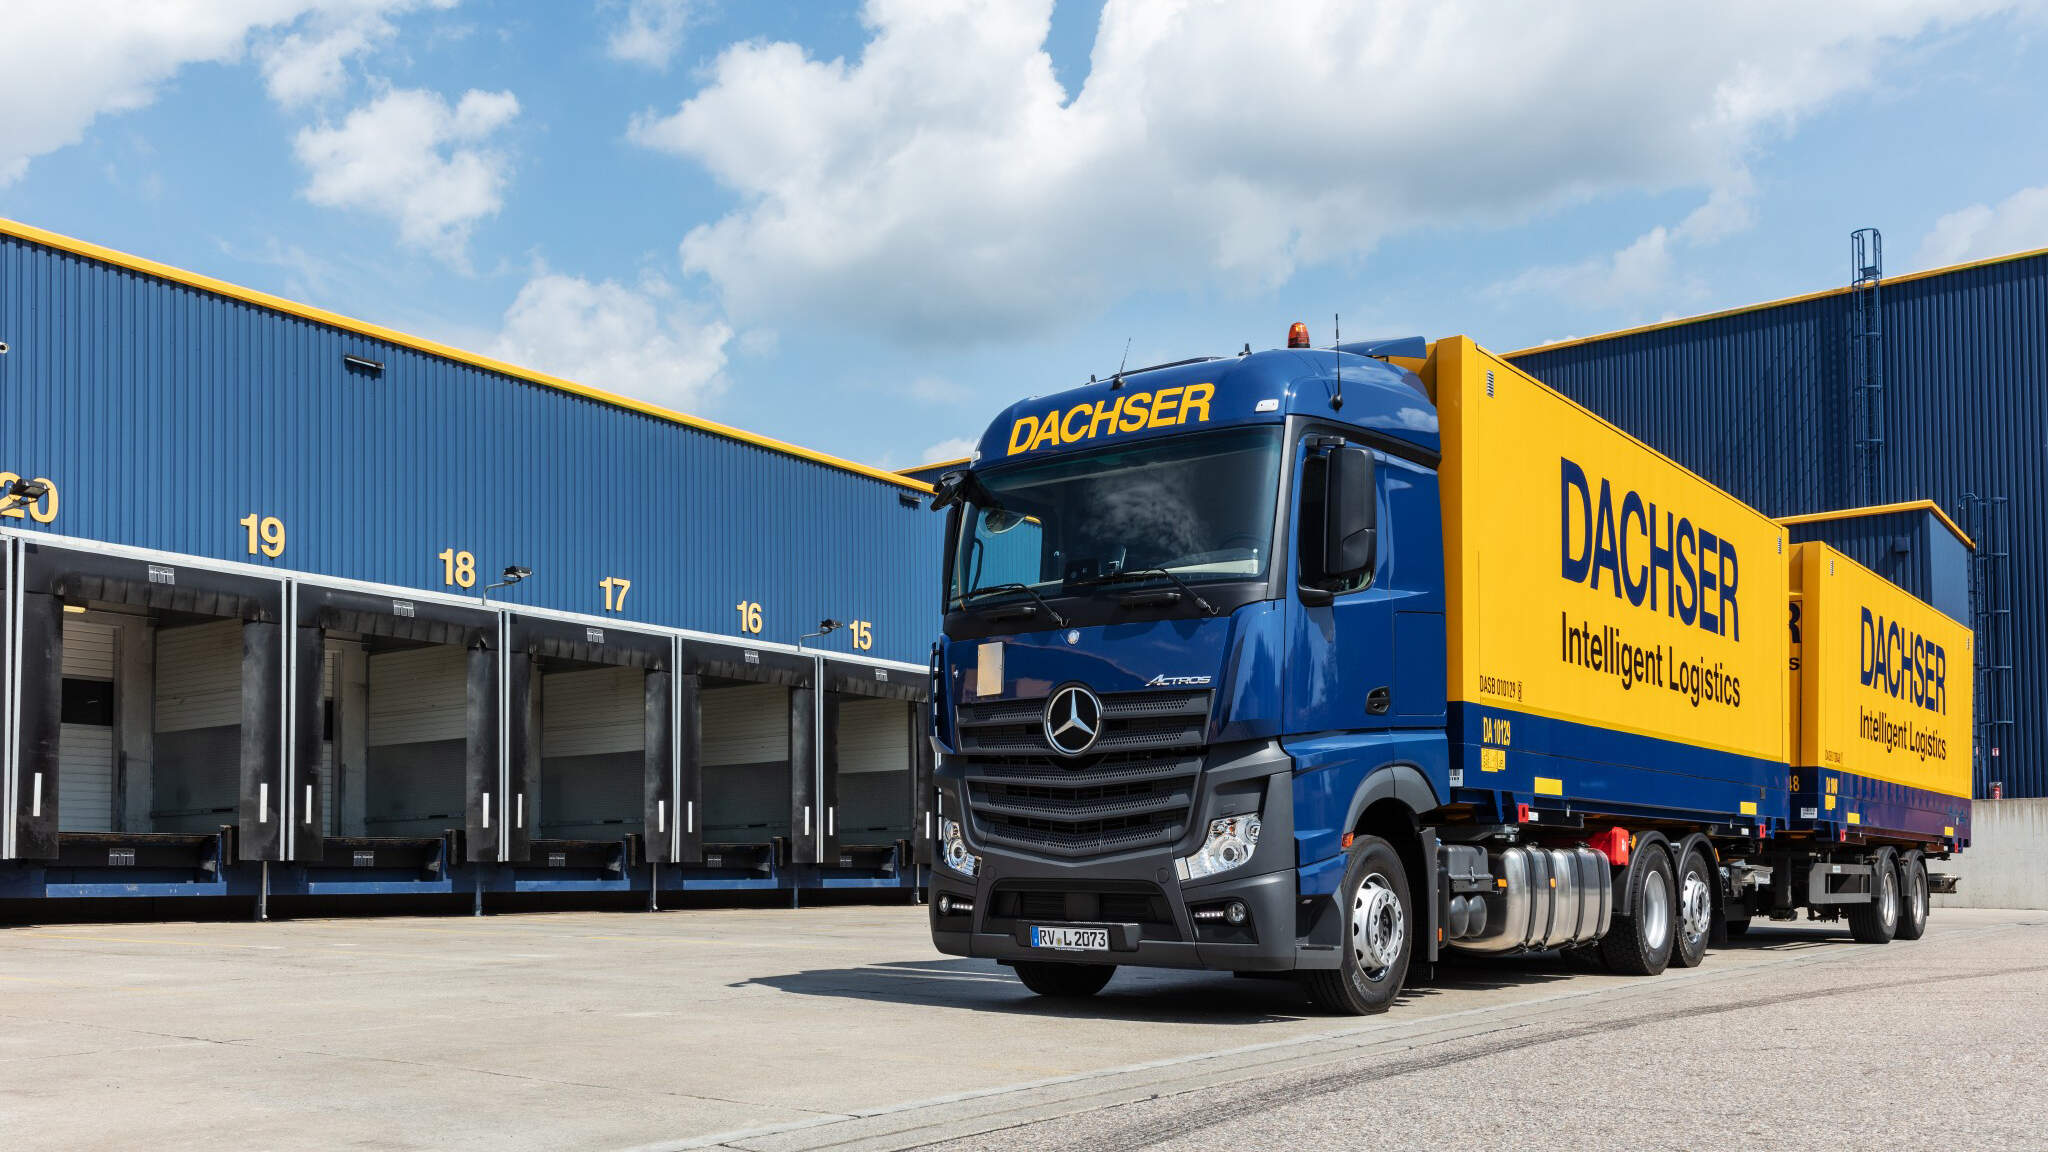 In December 2022, DACHSER acquired its Hungarian joint ventures.